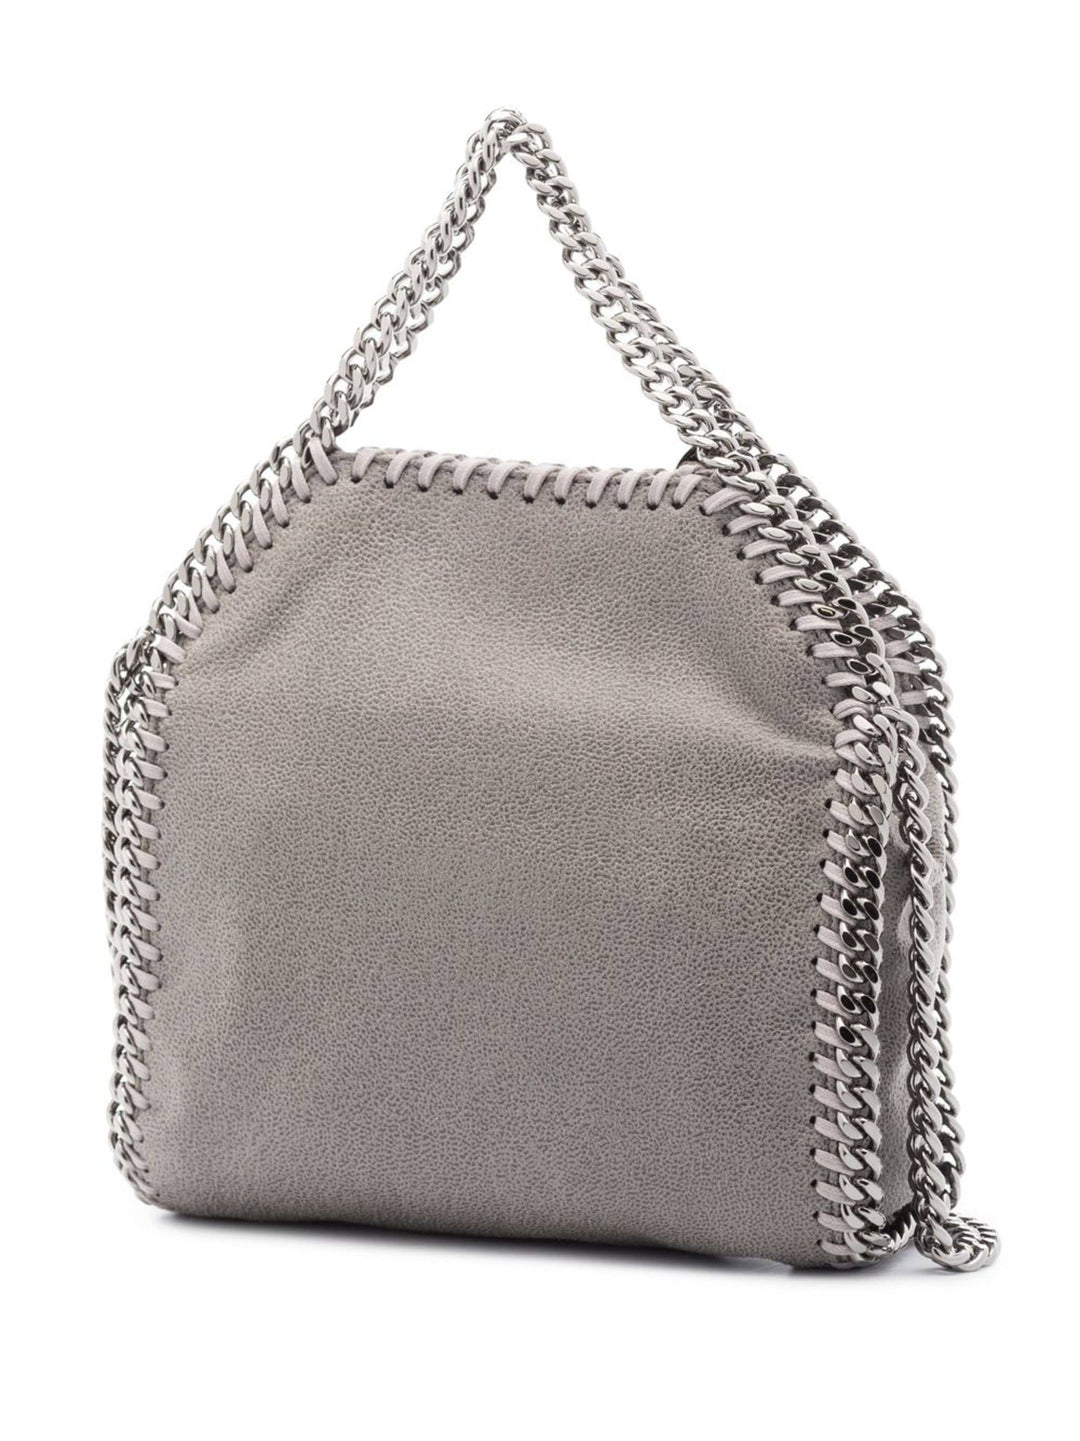 Mulberry-Falabella-Tiny-Tote-Light-Grey-3